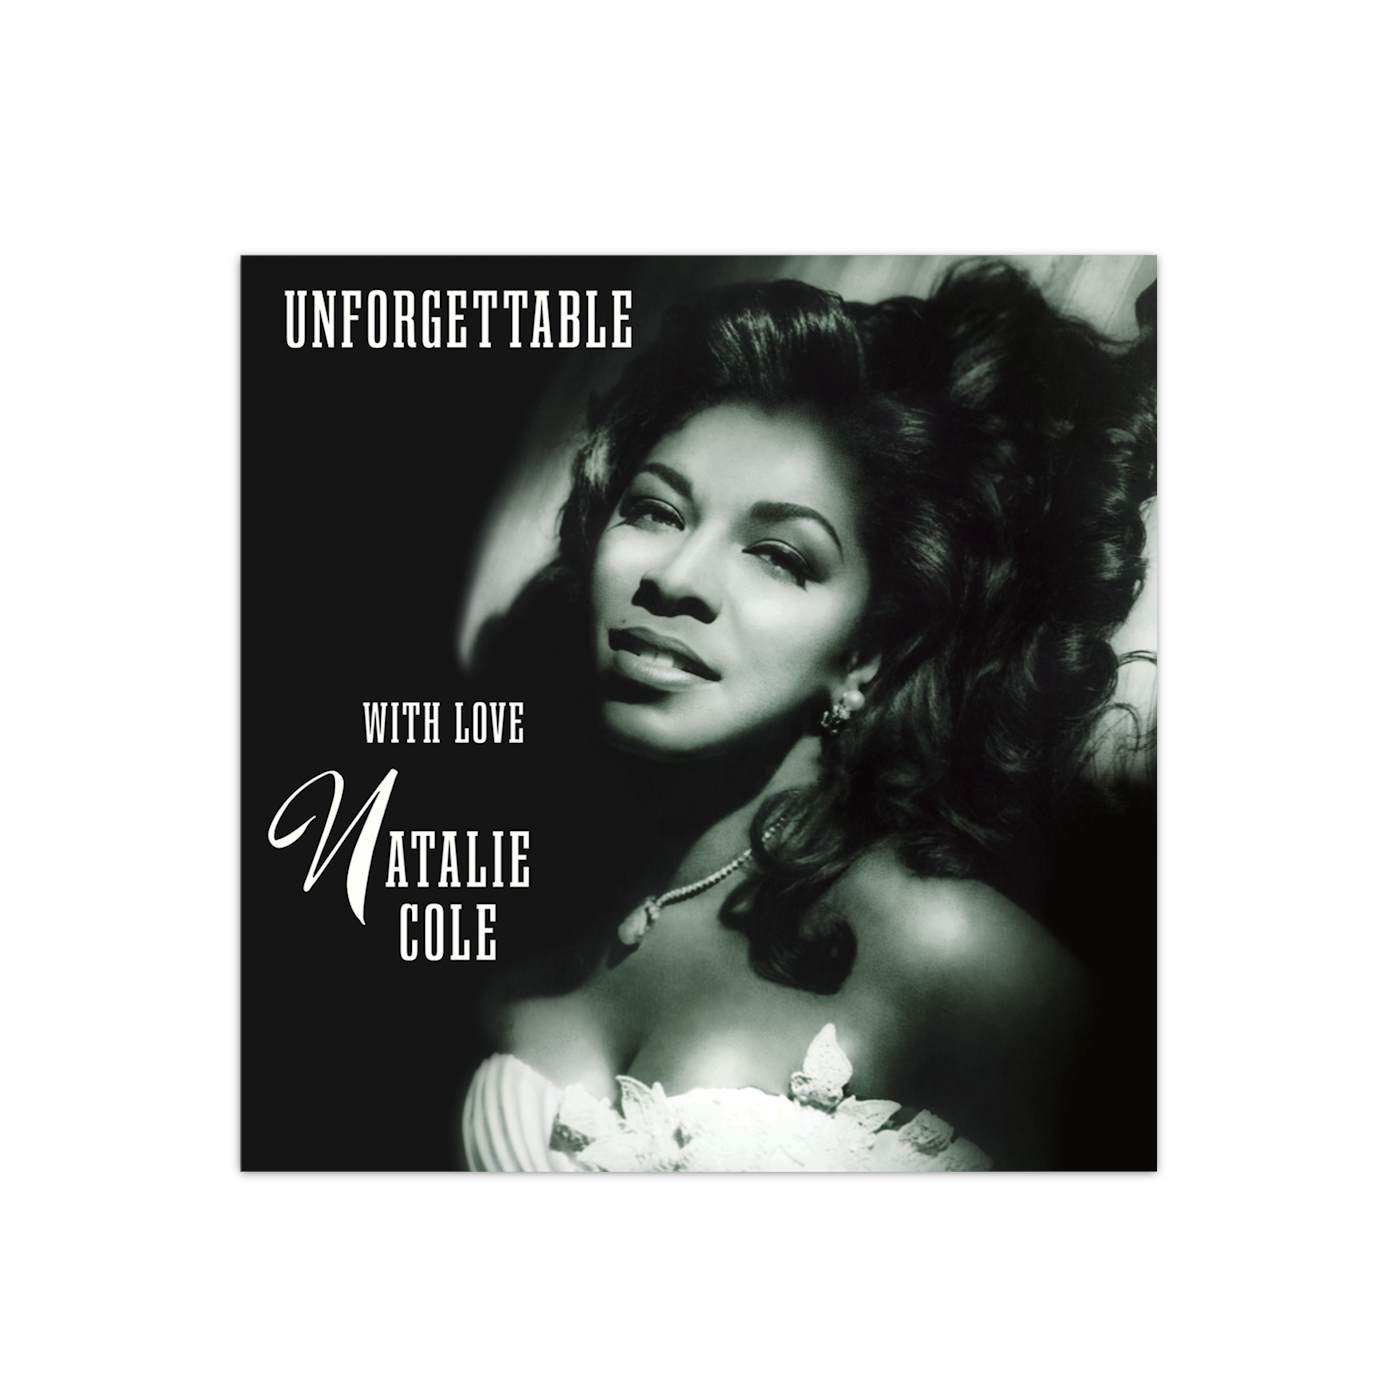 Natalie Cole Unforgettable...With Love: 30th Anniversary Edition (CD)